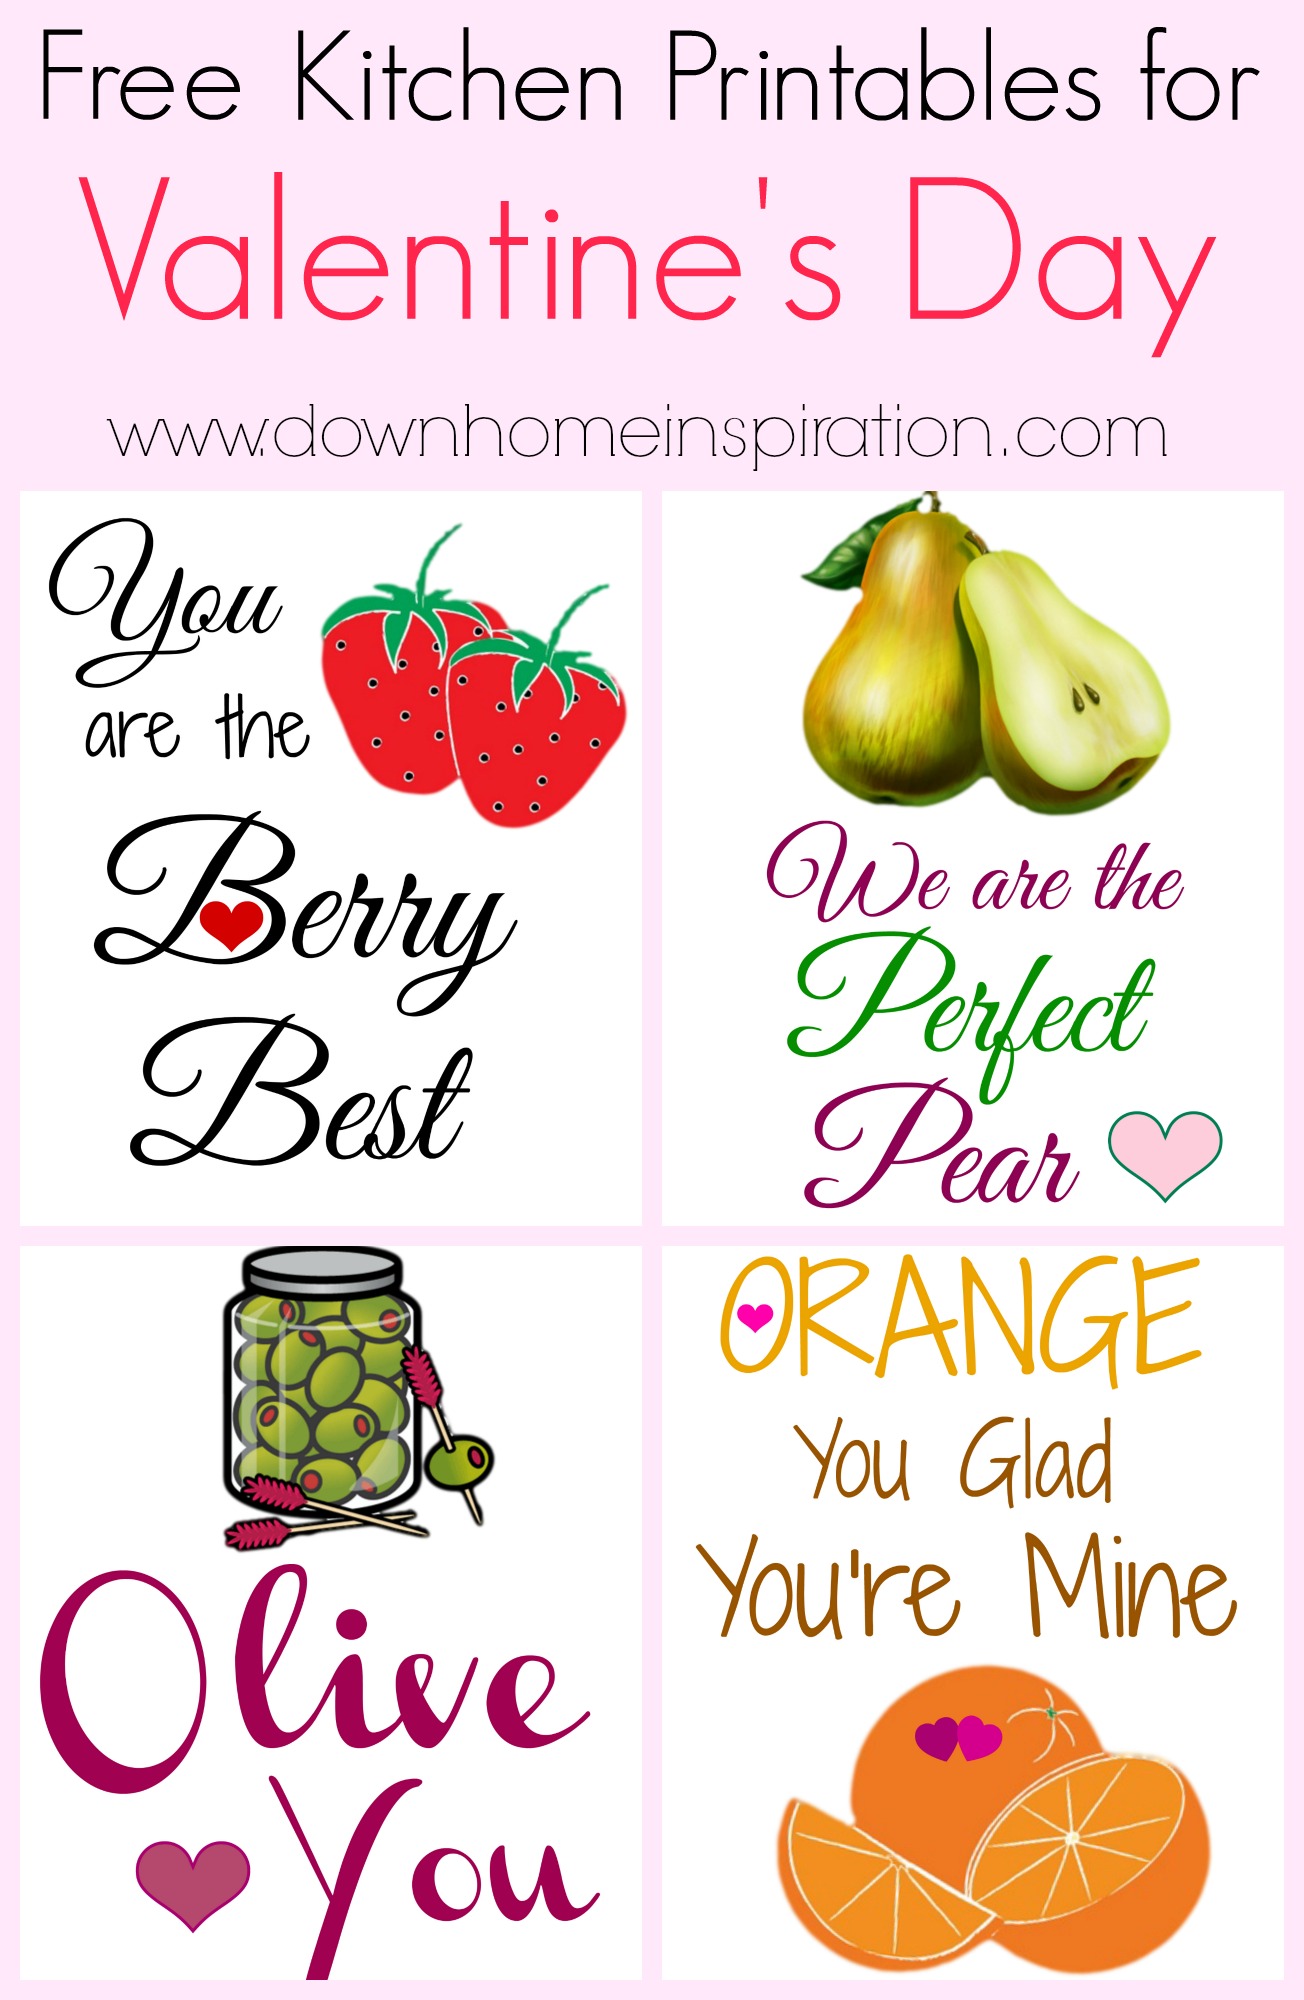 free-kitchen-printables-for-valentine-s-day-down-home-inspiration